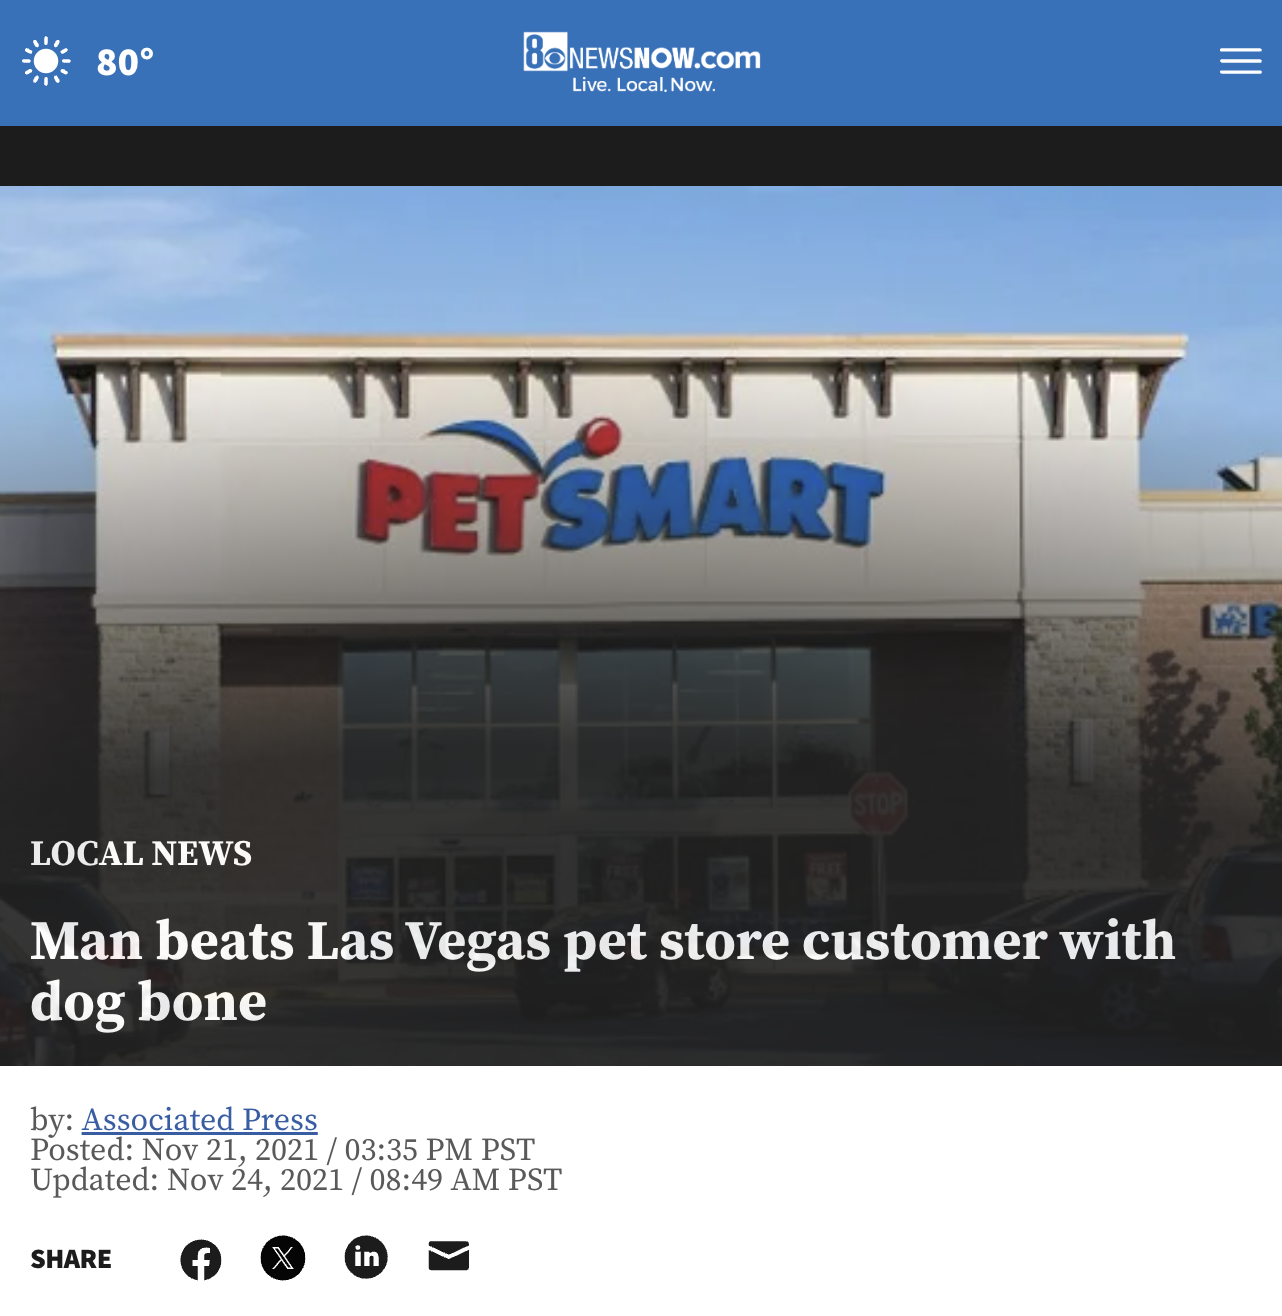 screenshot - 80 Bnewsnow.Com Live Local Now Petsmart Iii Local News Man beats Las Vegas pet store customer with dog bone by Associated Press Posted Pst Updated Pst